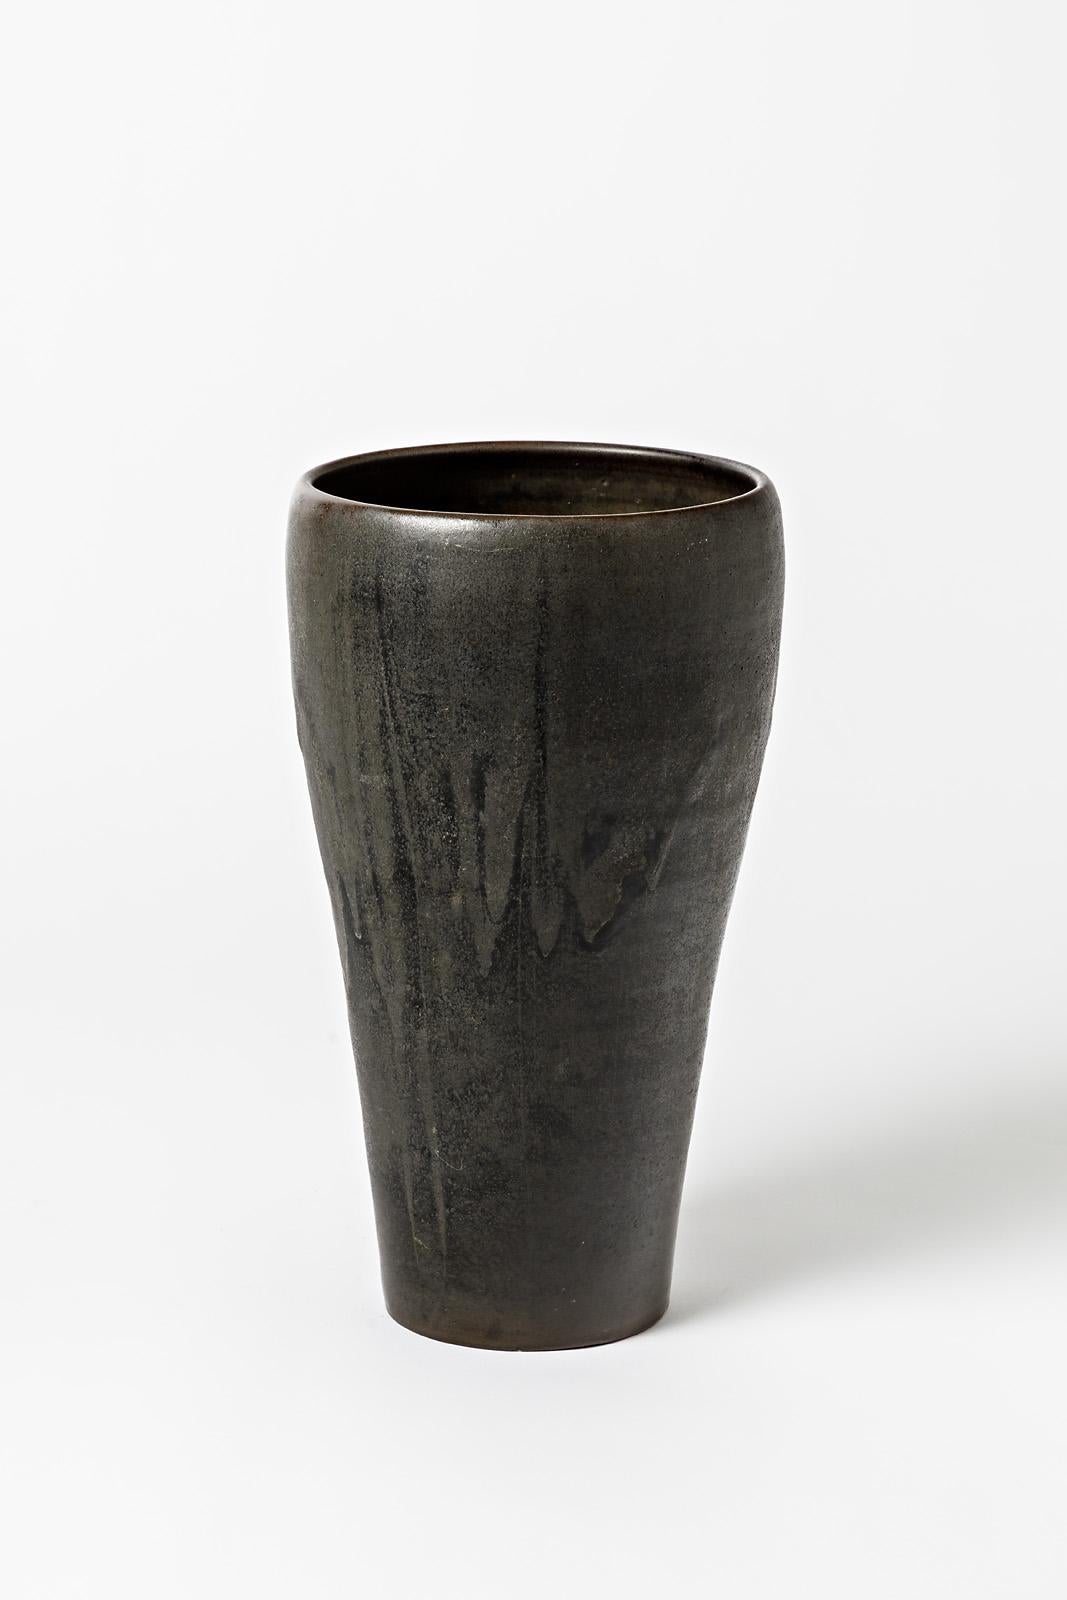 Beaux Arts Matt and shiny black glazed stoneware vase by Roger Jacques, circa 1960-1970. For Sale